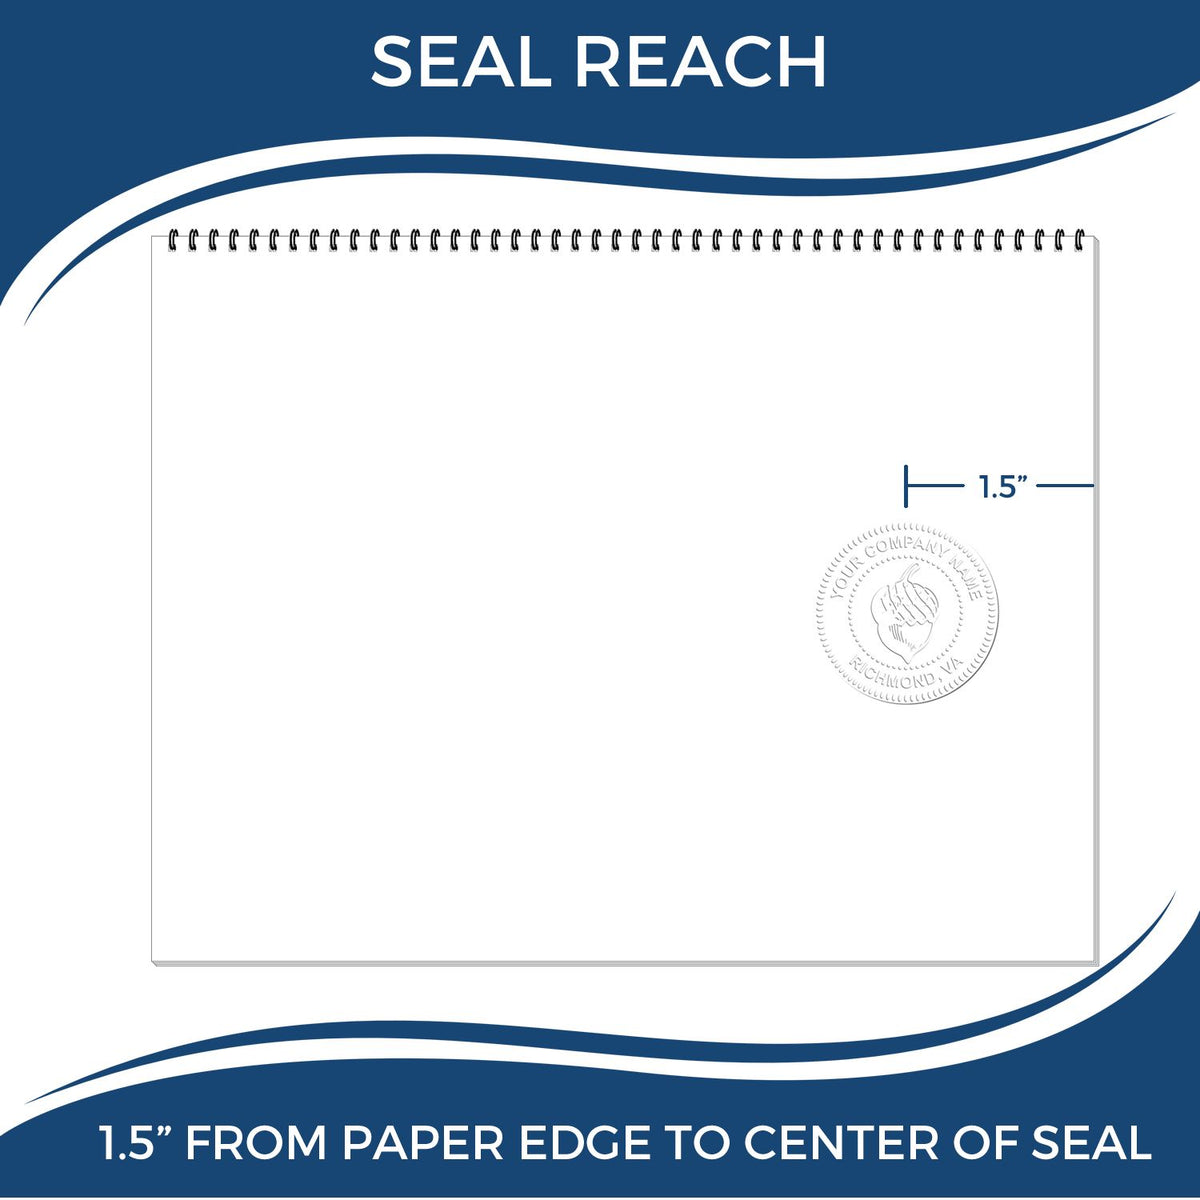 An infographic showing the seal reach which is represented by a ruler and a miniature seal image of the Handheld Alaska Architect Seal Embosser